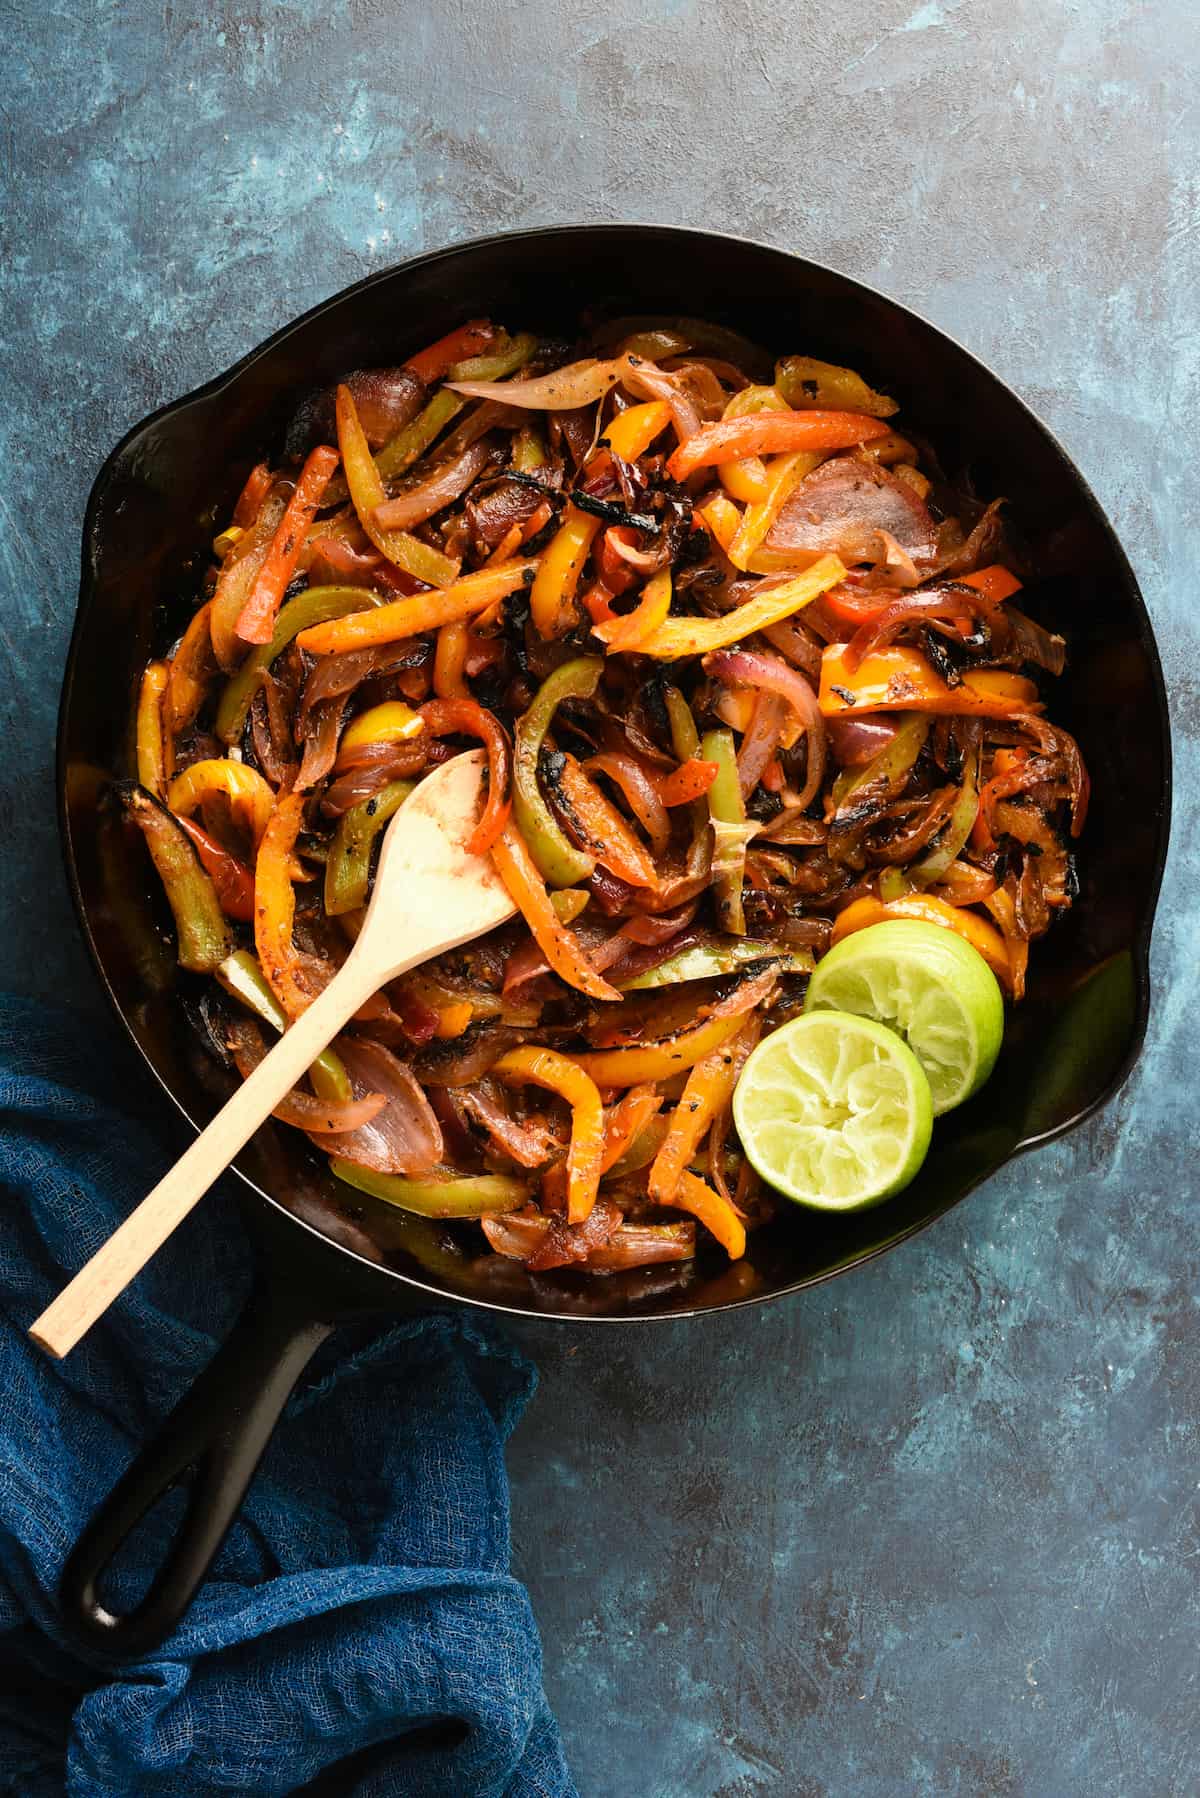 Cast iron skillet filled with cooked fajitas veggies, with wooden spoon and lime halves.